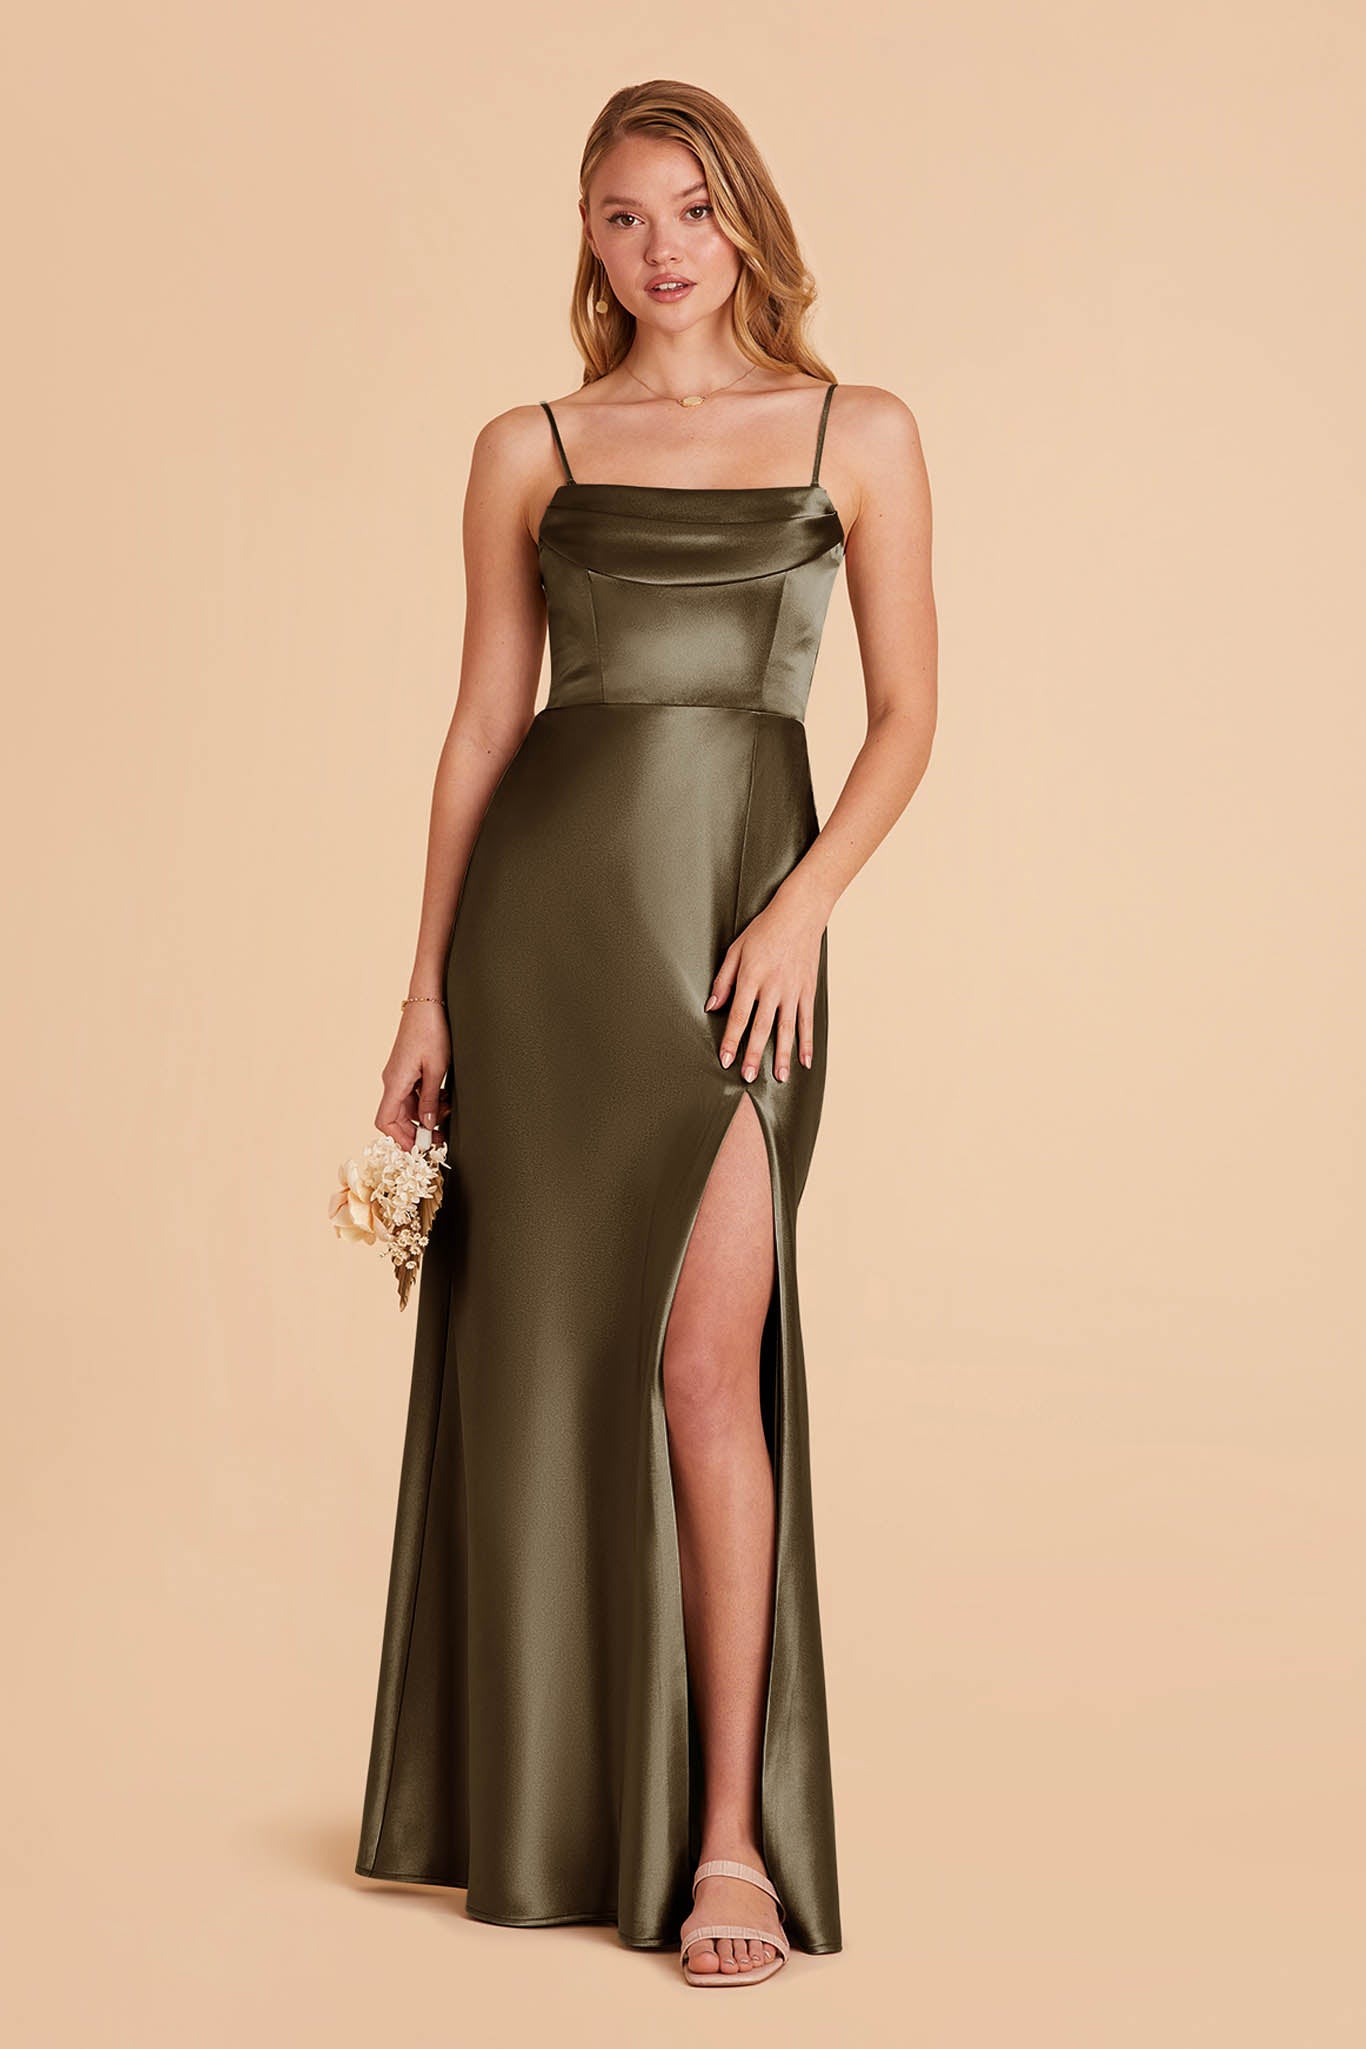 Olive Mia Convertible Dress by Birdy Grey